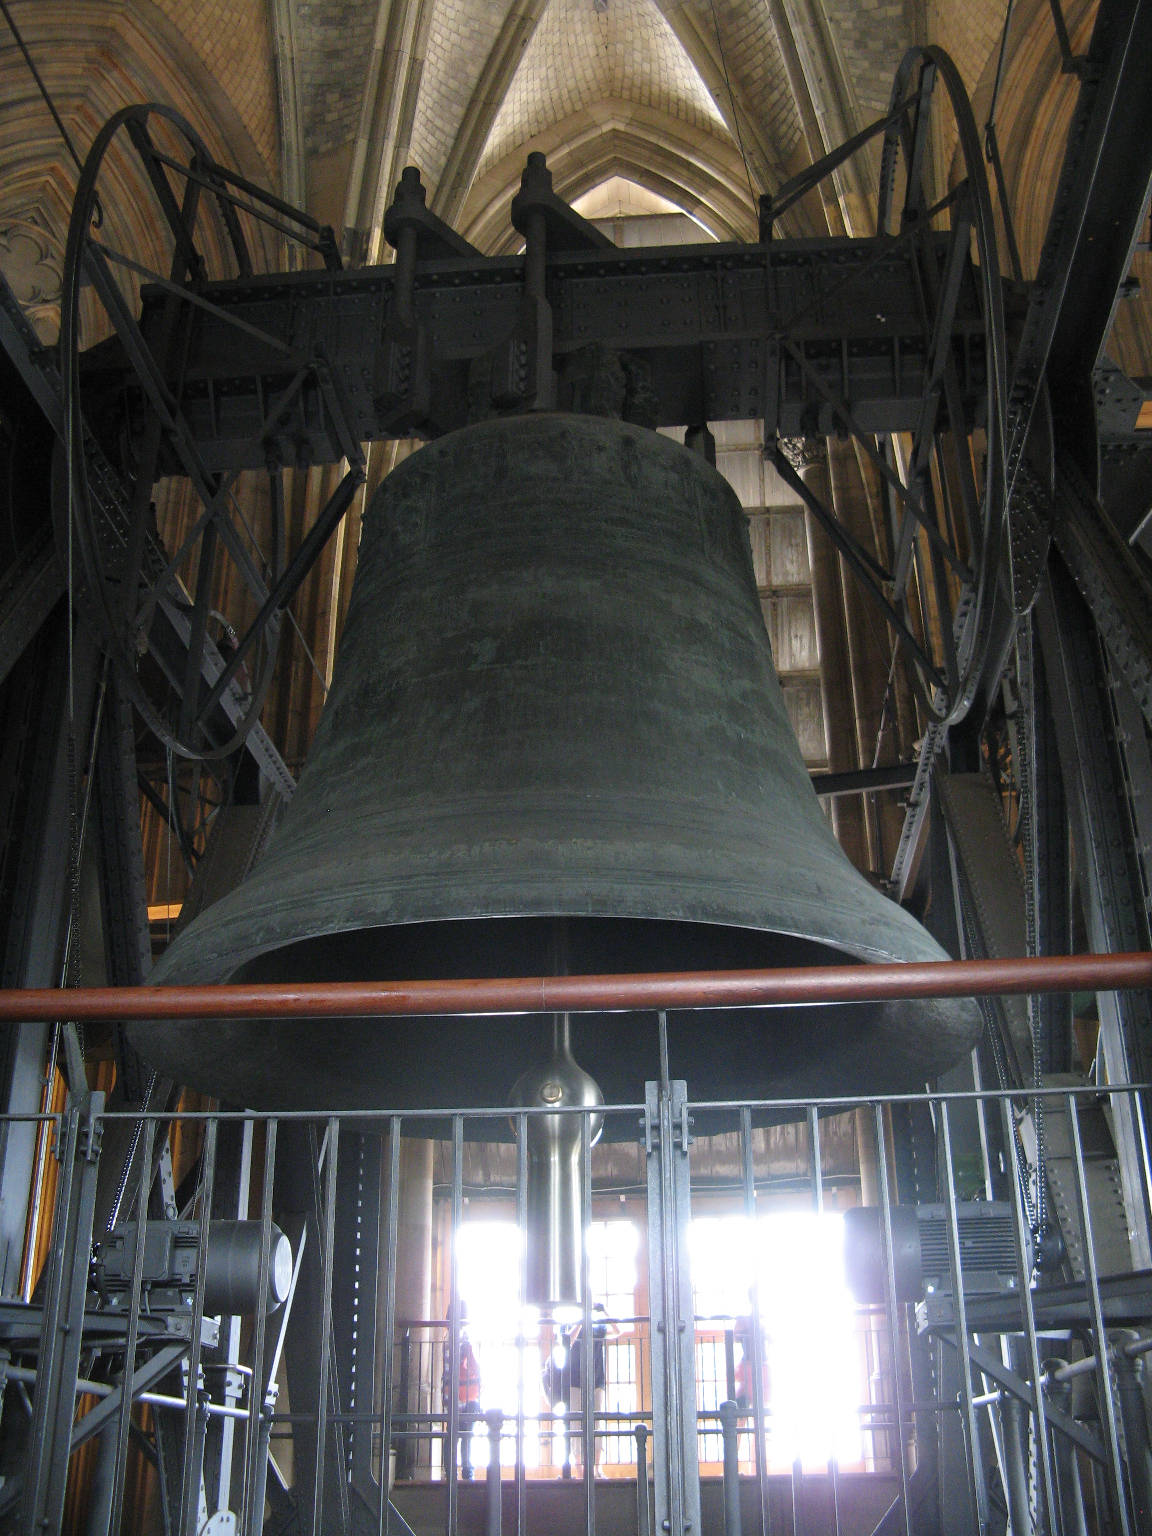 The biggest bell in the tower